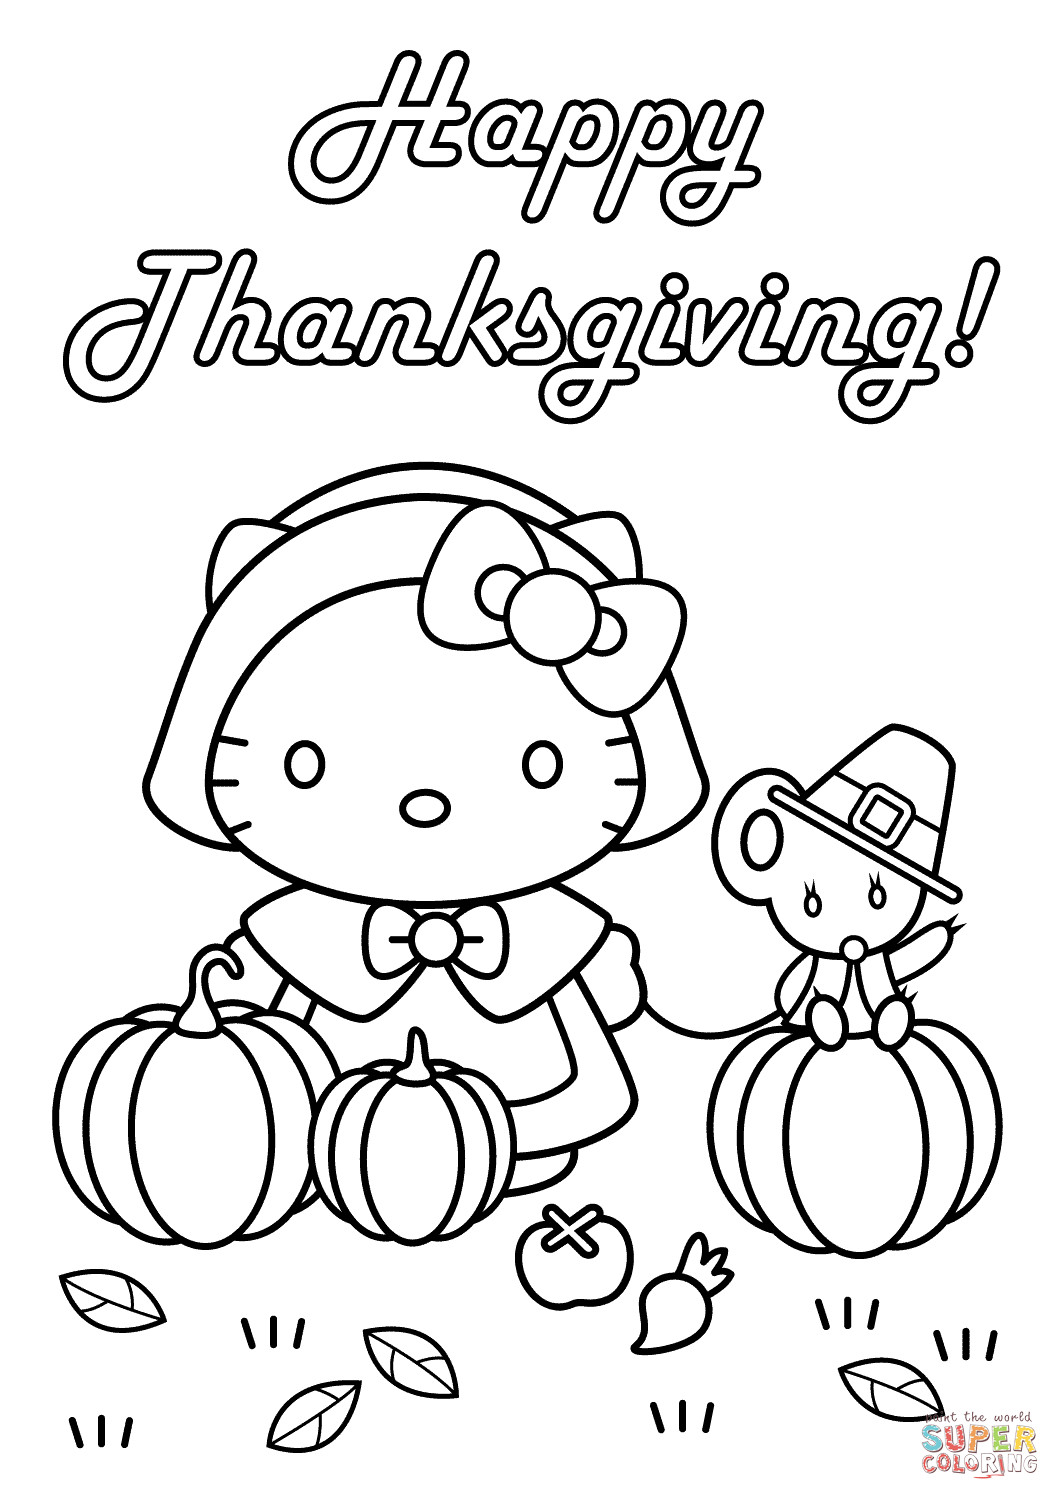 Thanksgiving Coloring Pages
 Hello Kitty Happy Thanksgiving coloring page